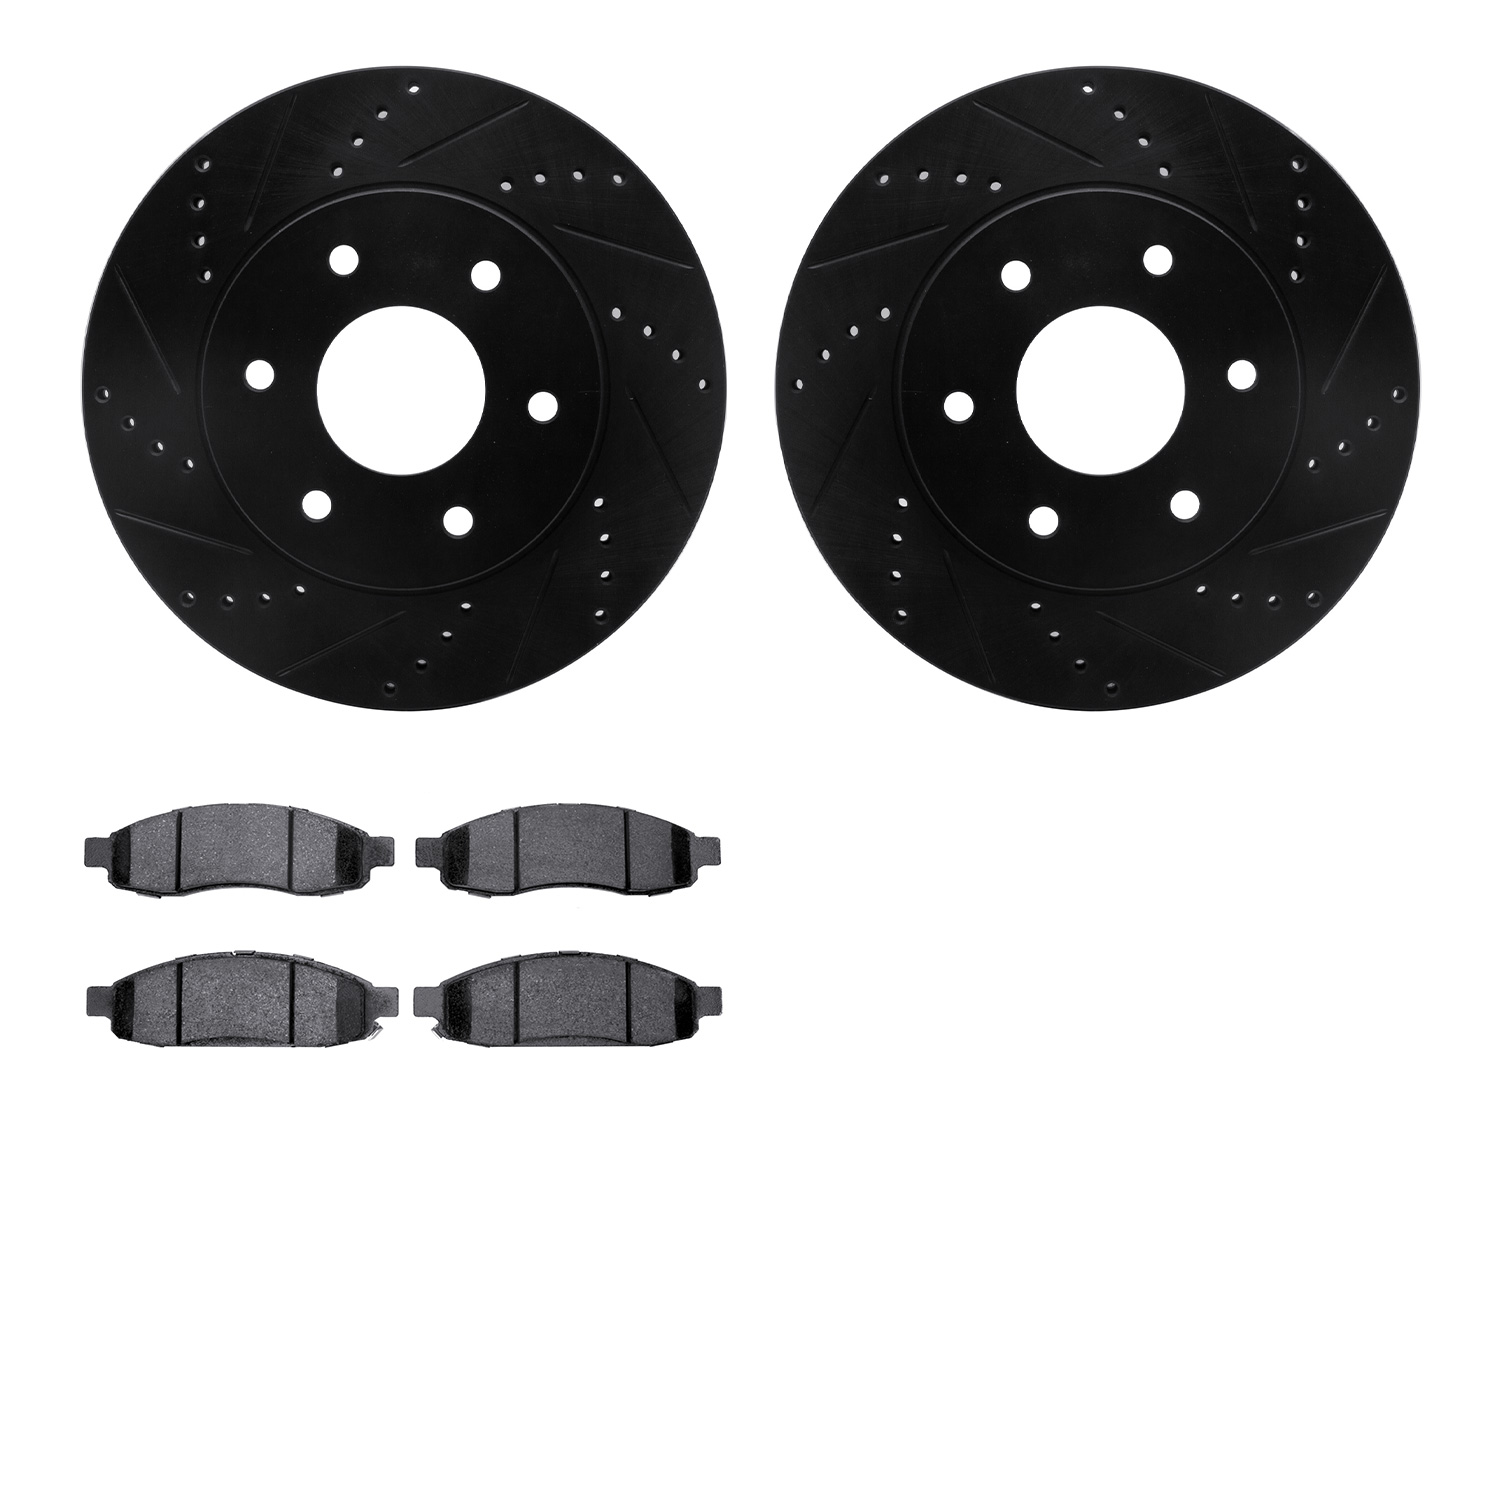 8402-67002 Drilled/Slotted Brake Rotors with Ultimate-Duty Brake Pads Kit [Black], 2004-2005 Infiniti/Nissan, Position: Front